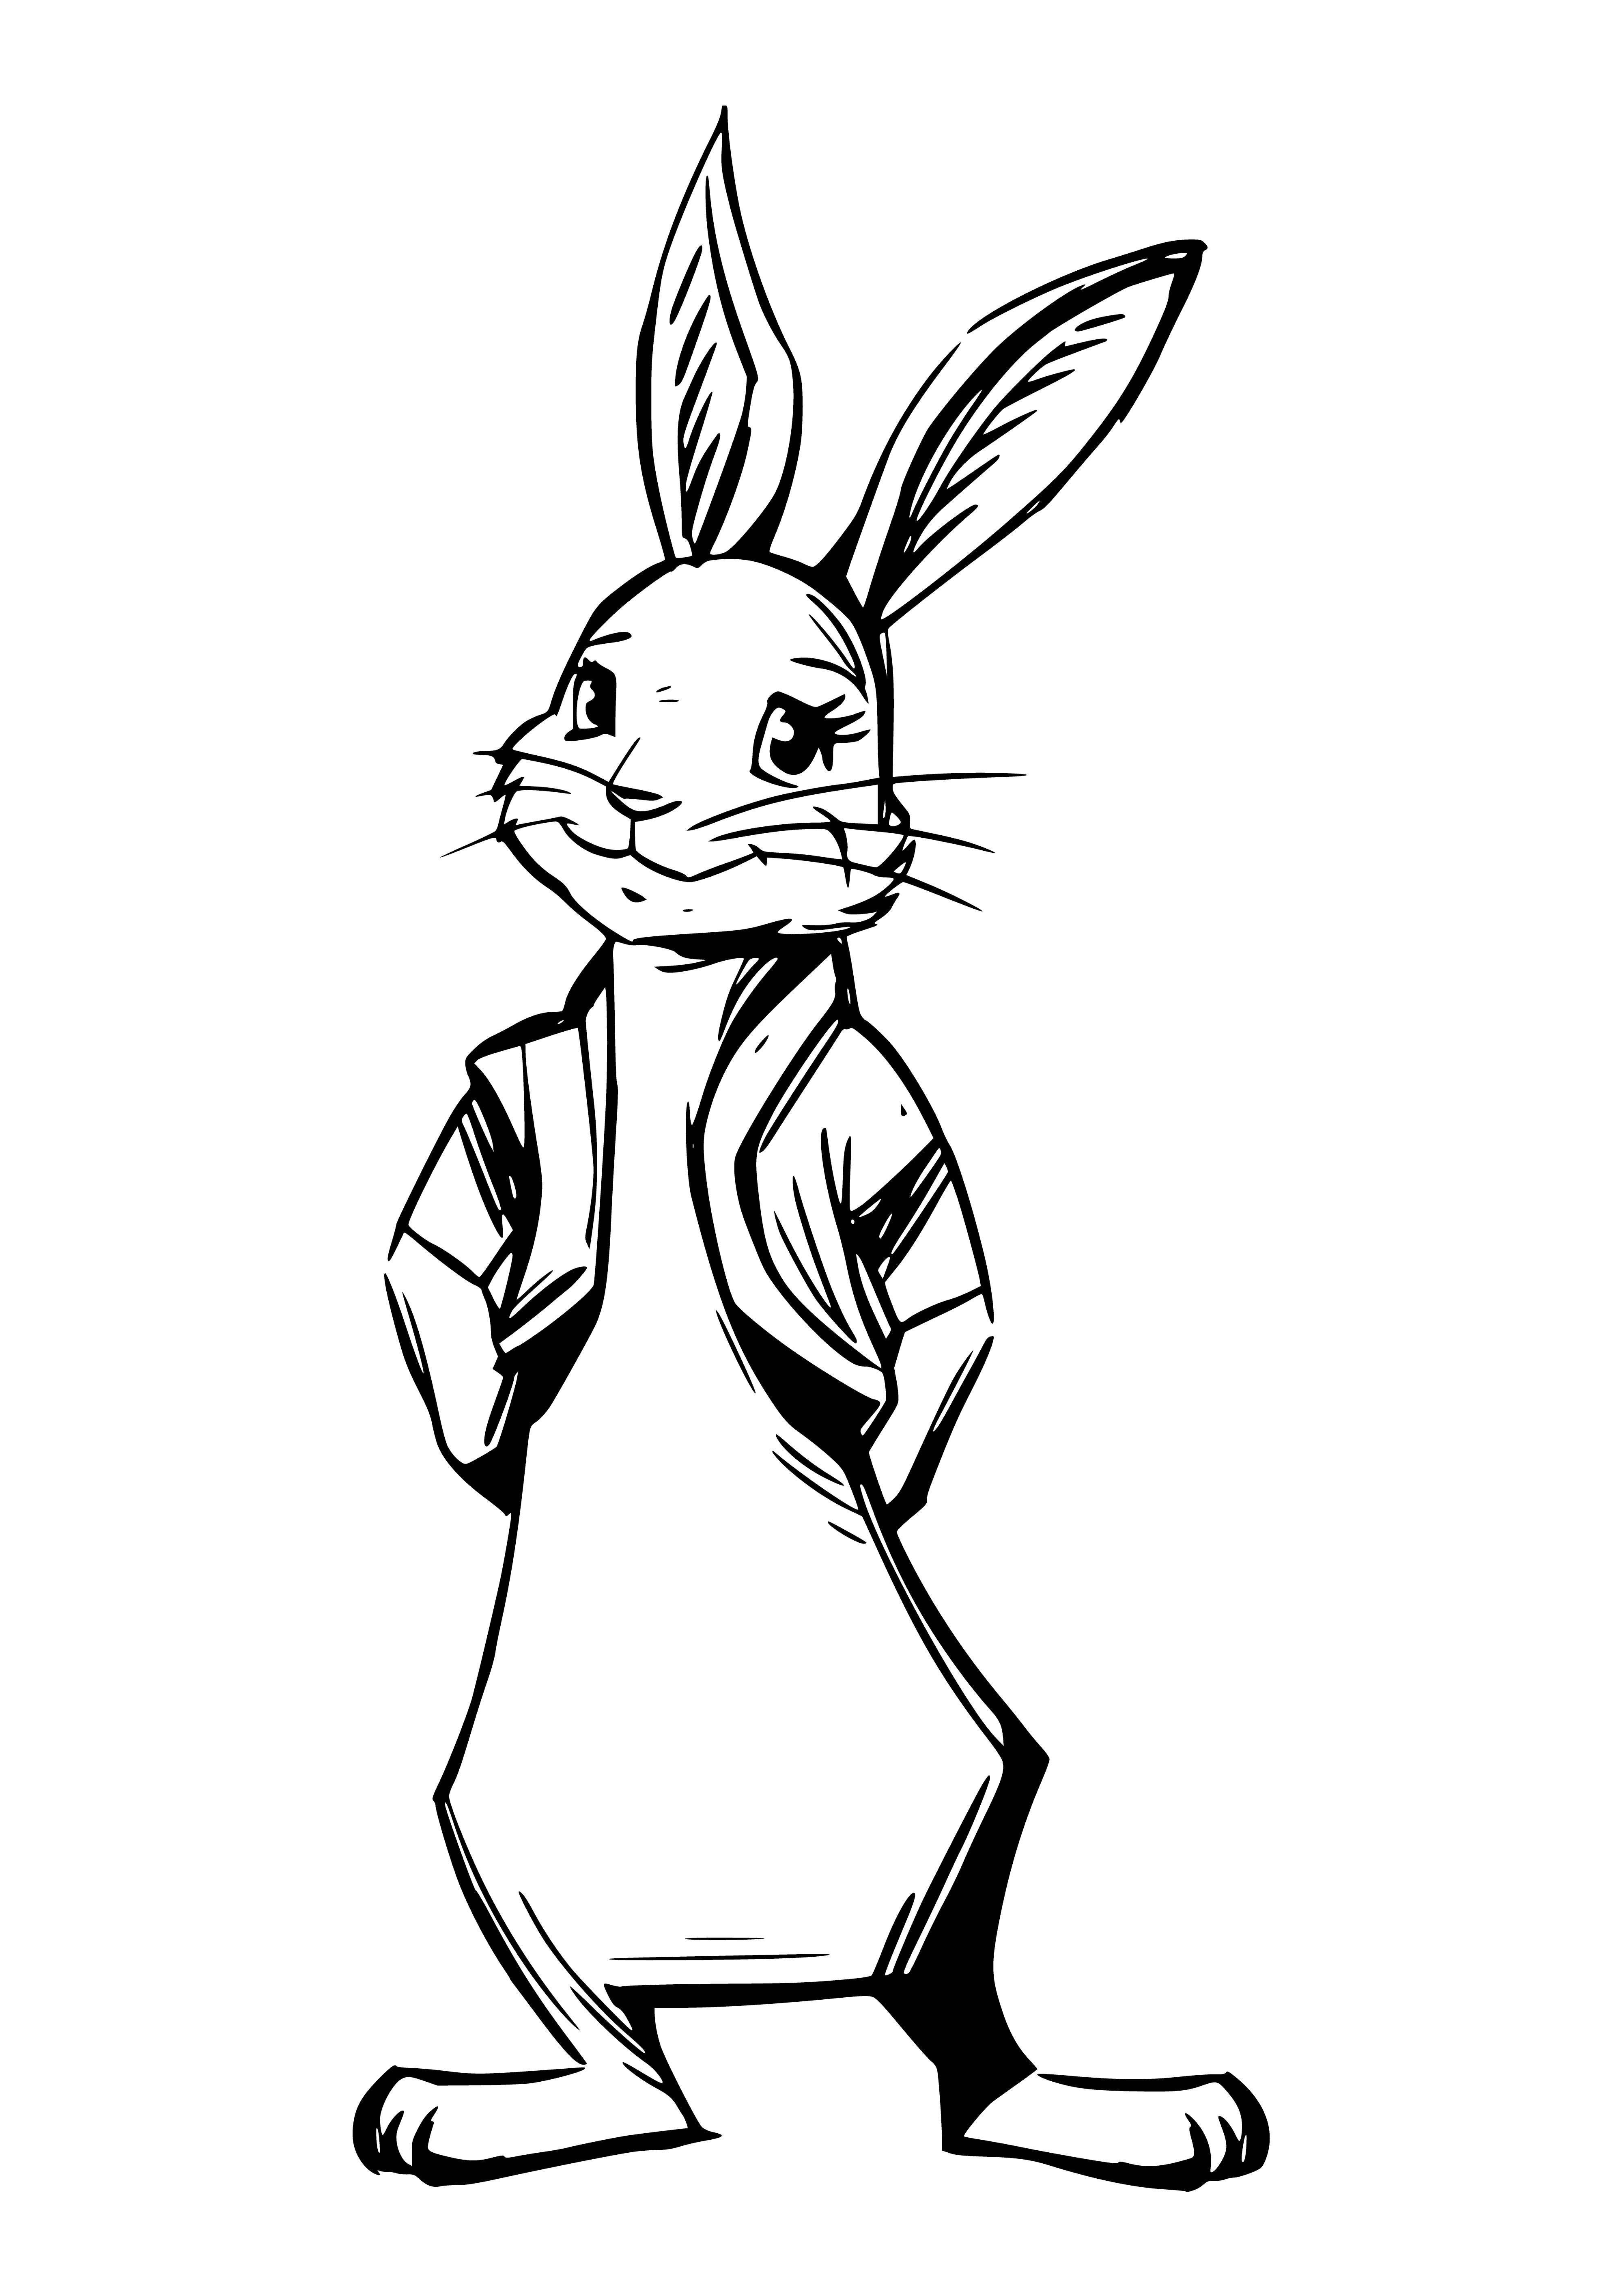 Peter Rabbit's Middle Sister - Flopsy coloring page